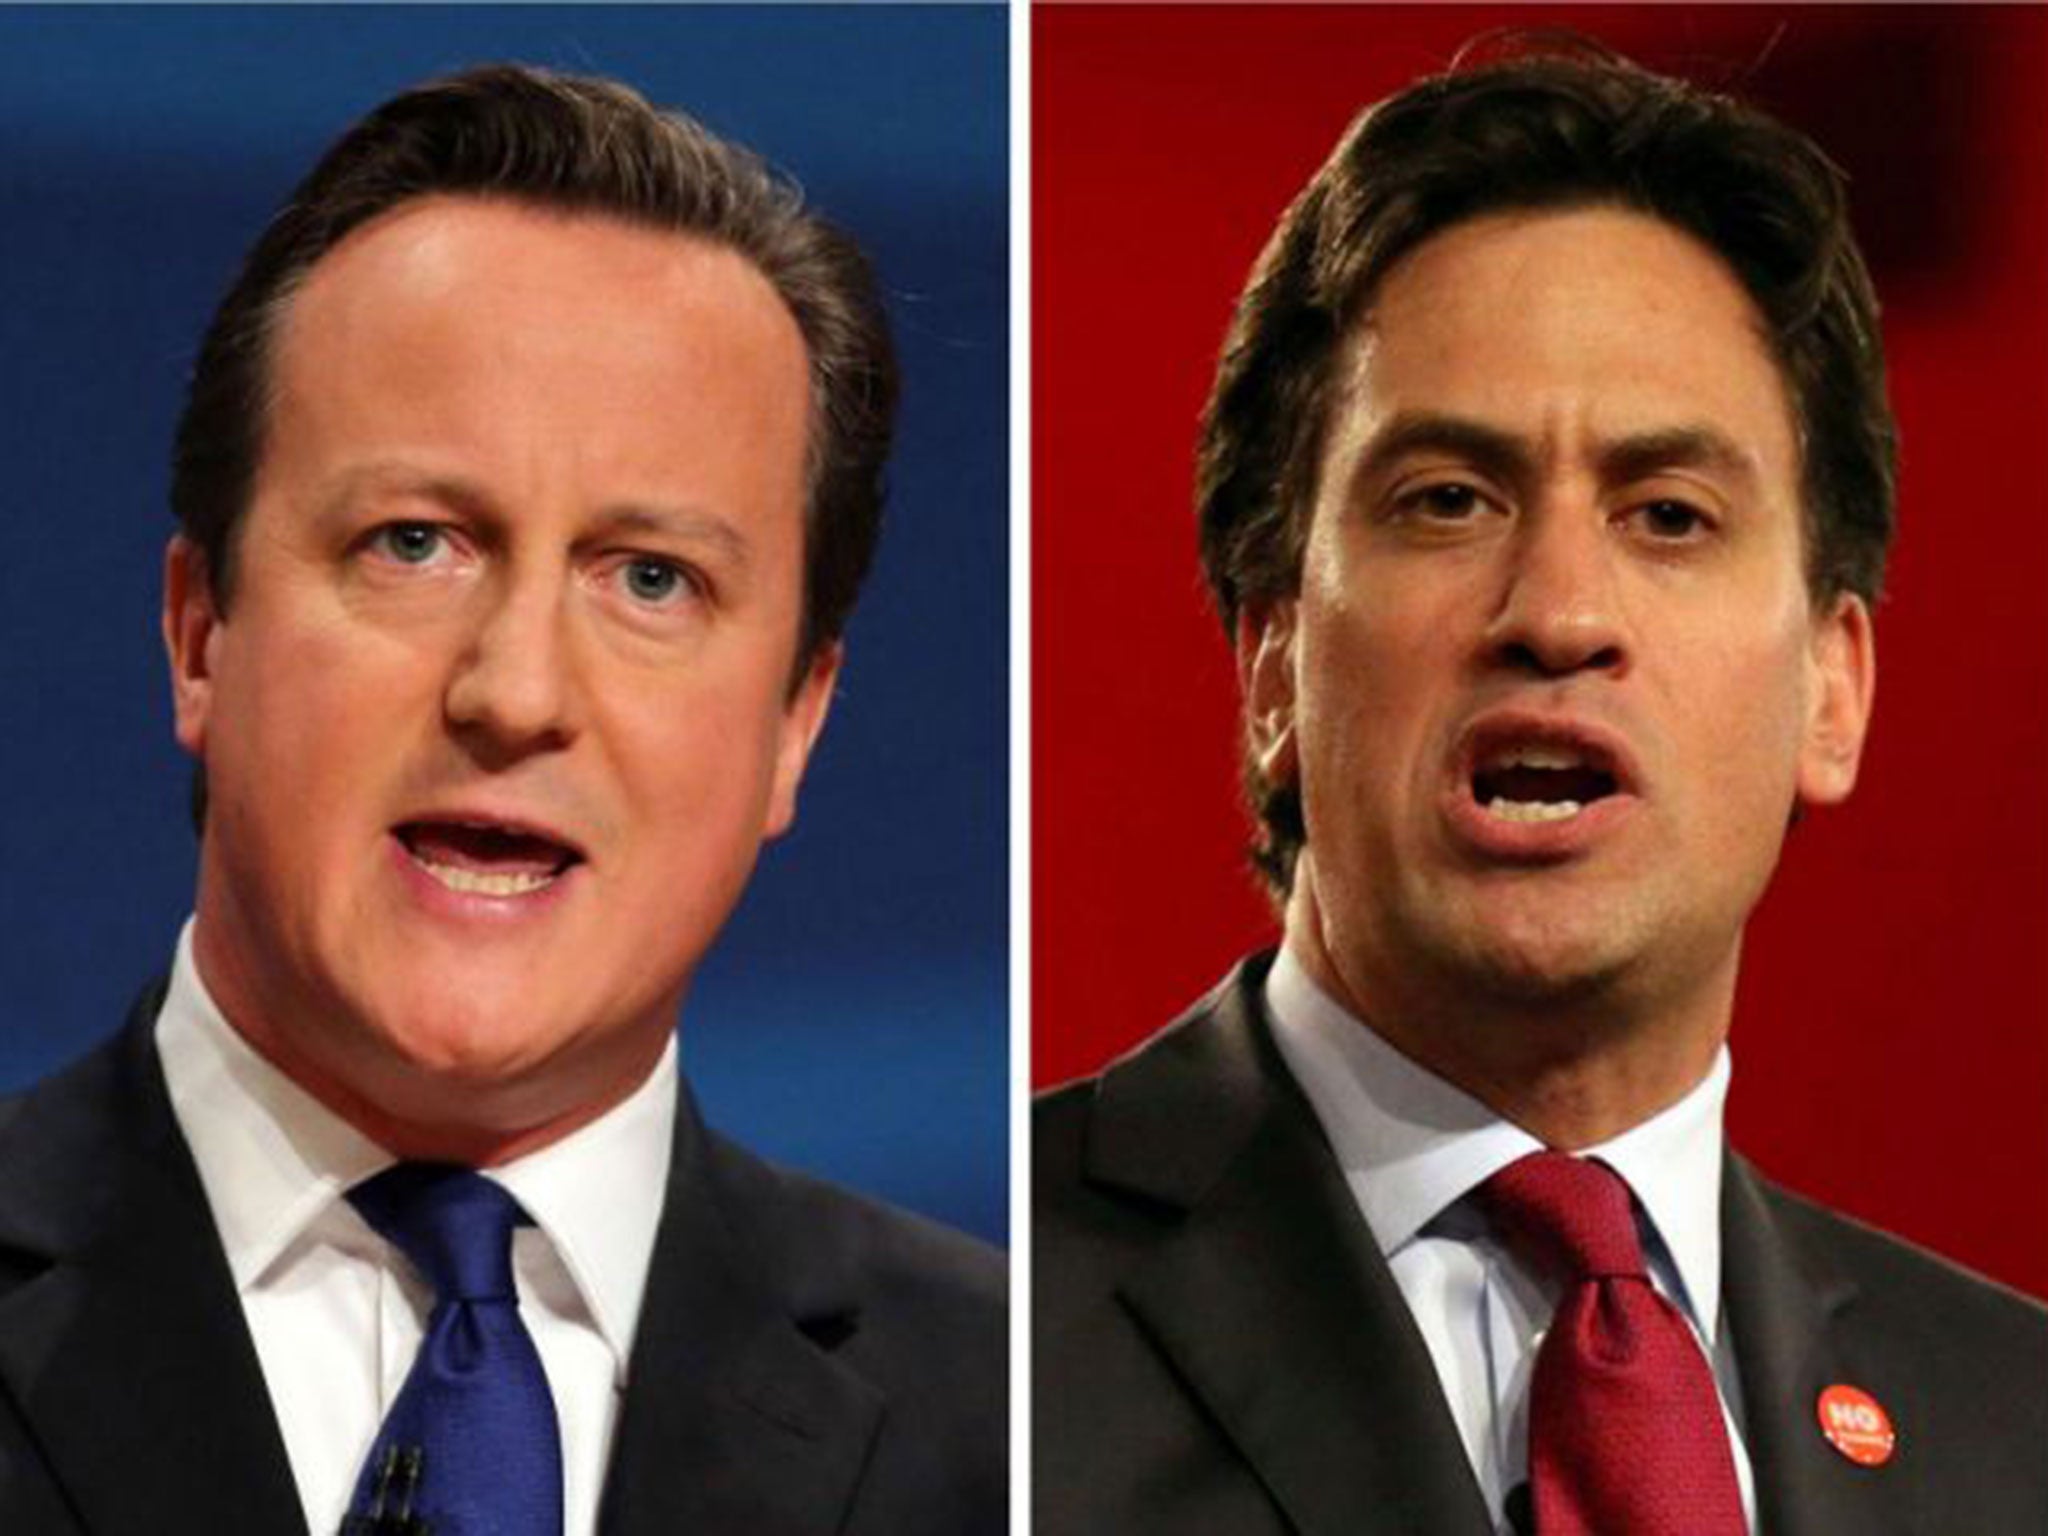 Cameron and Miliband went head-to-head in the live televised debate last night